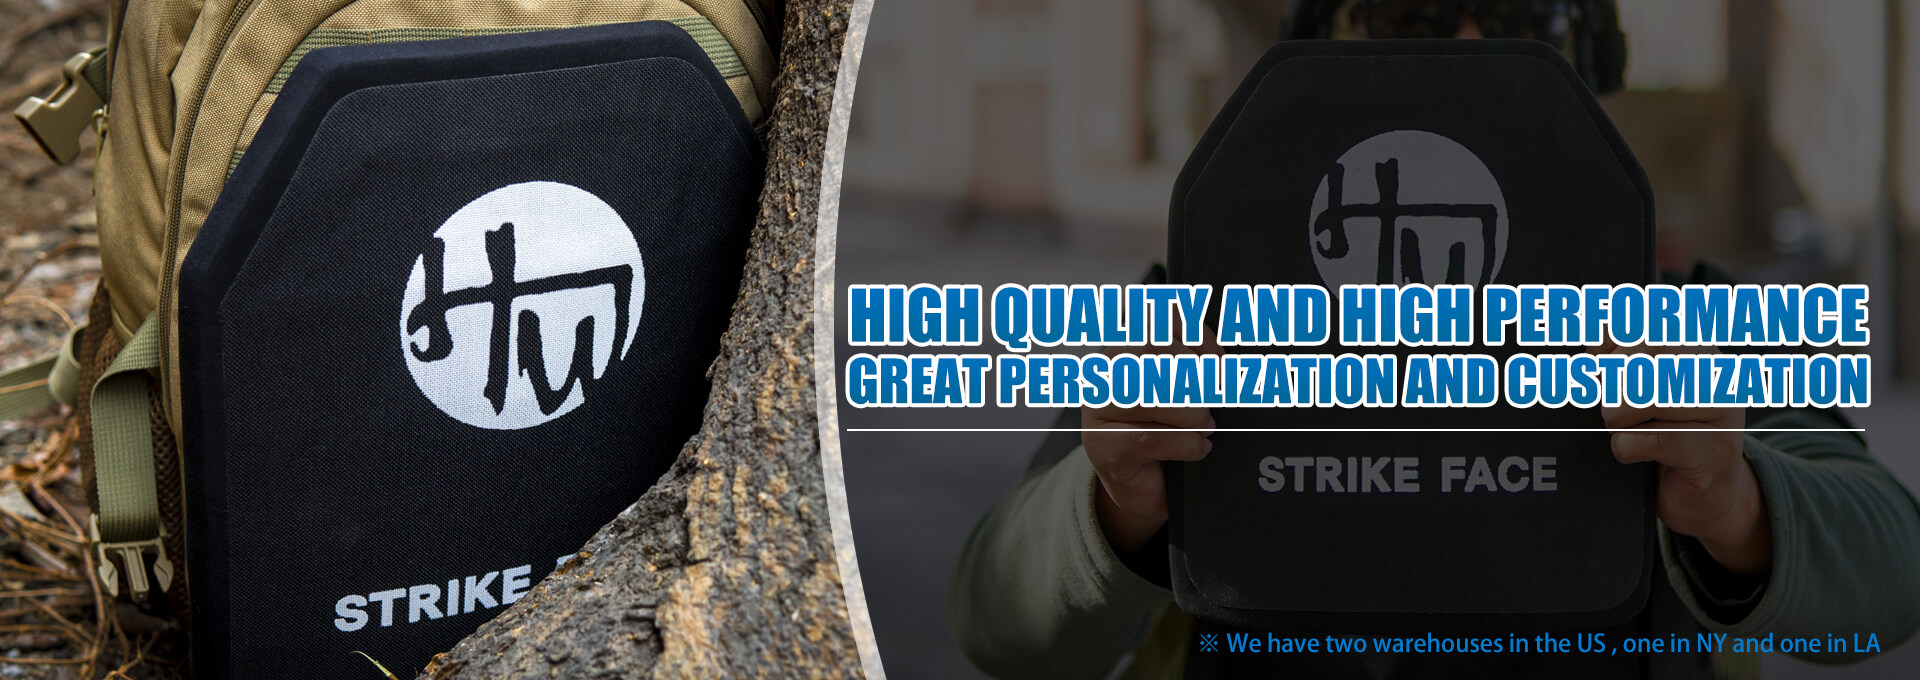 Great personalization and customization Banner 0303